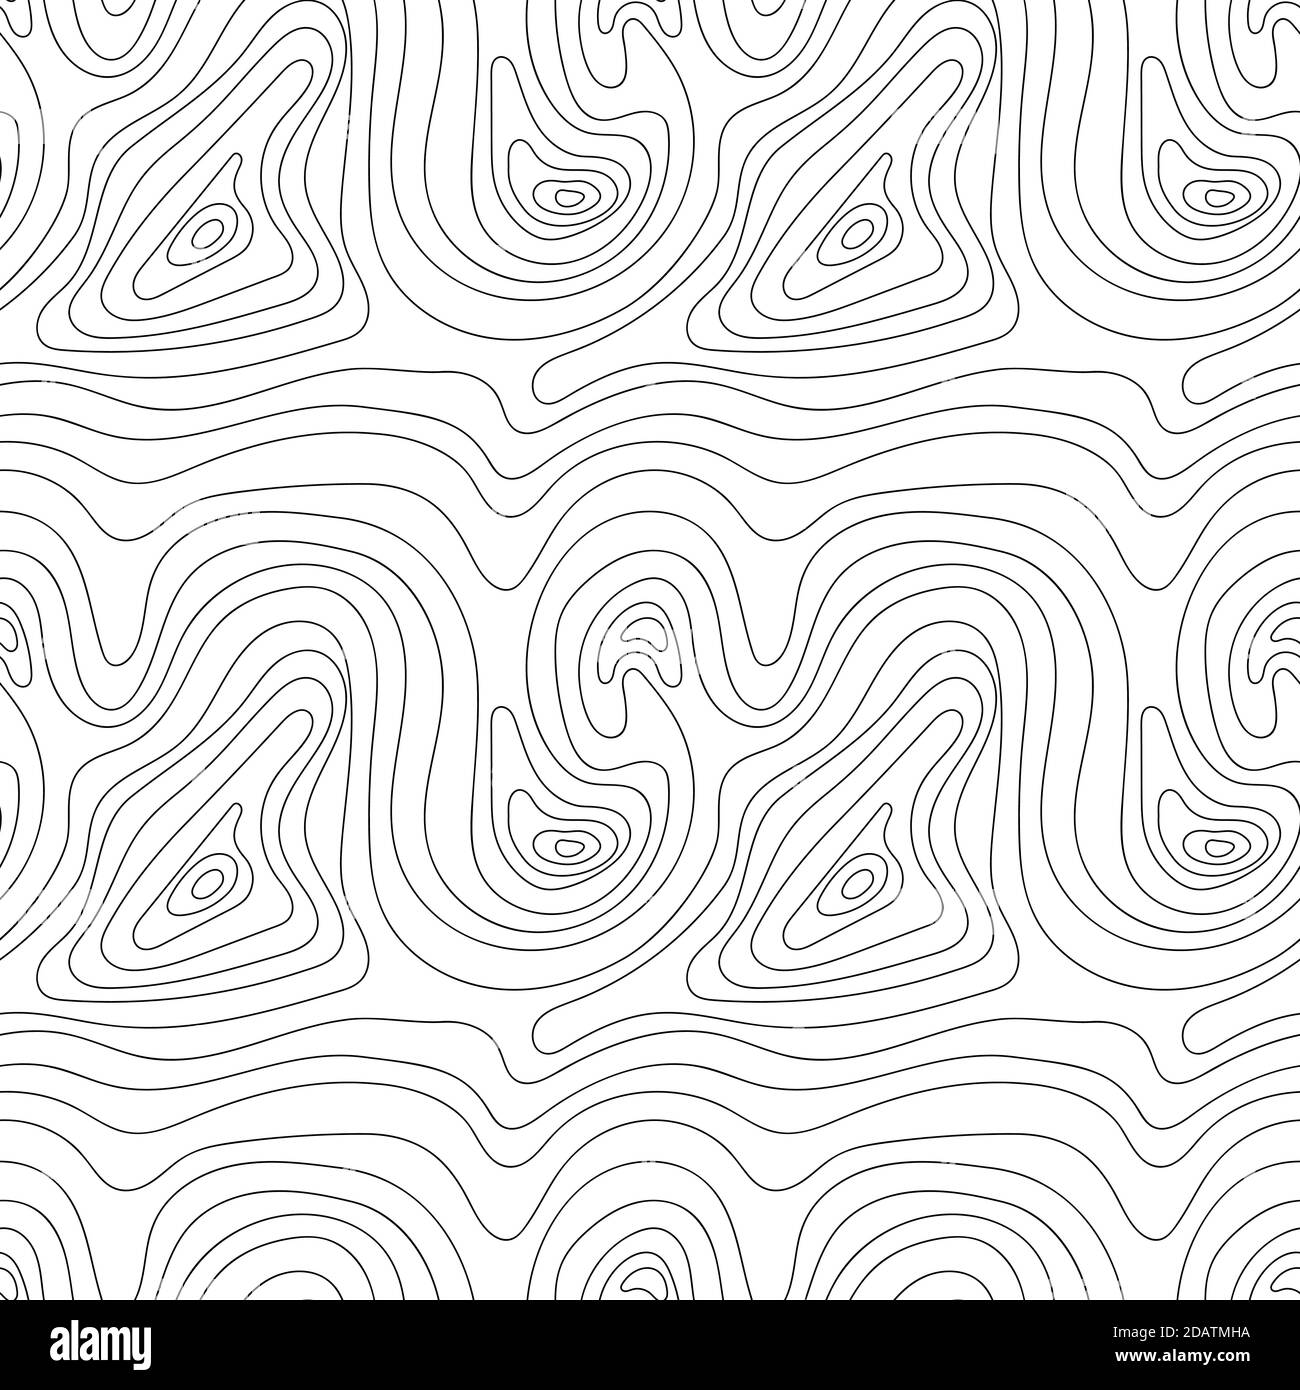 Abstract seamless pattern with curved lines. Vector illustration. Stock Vector